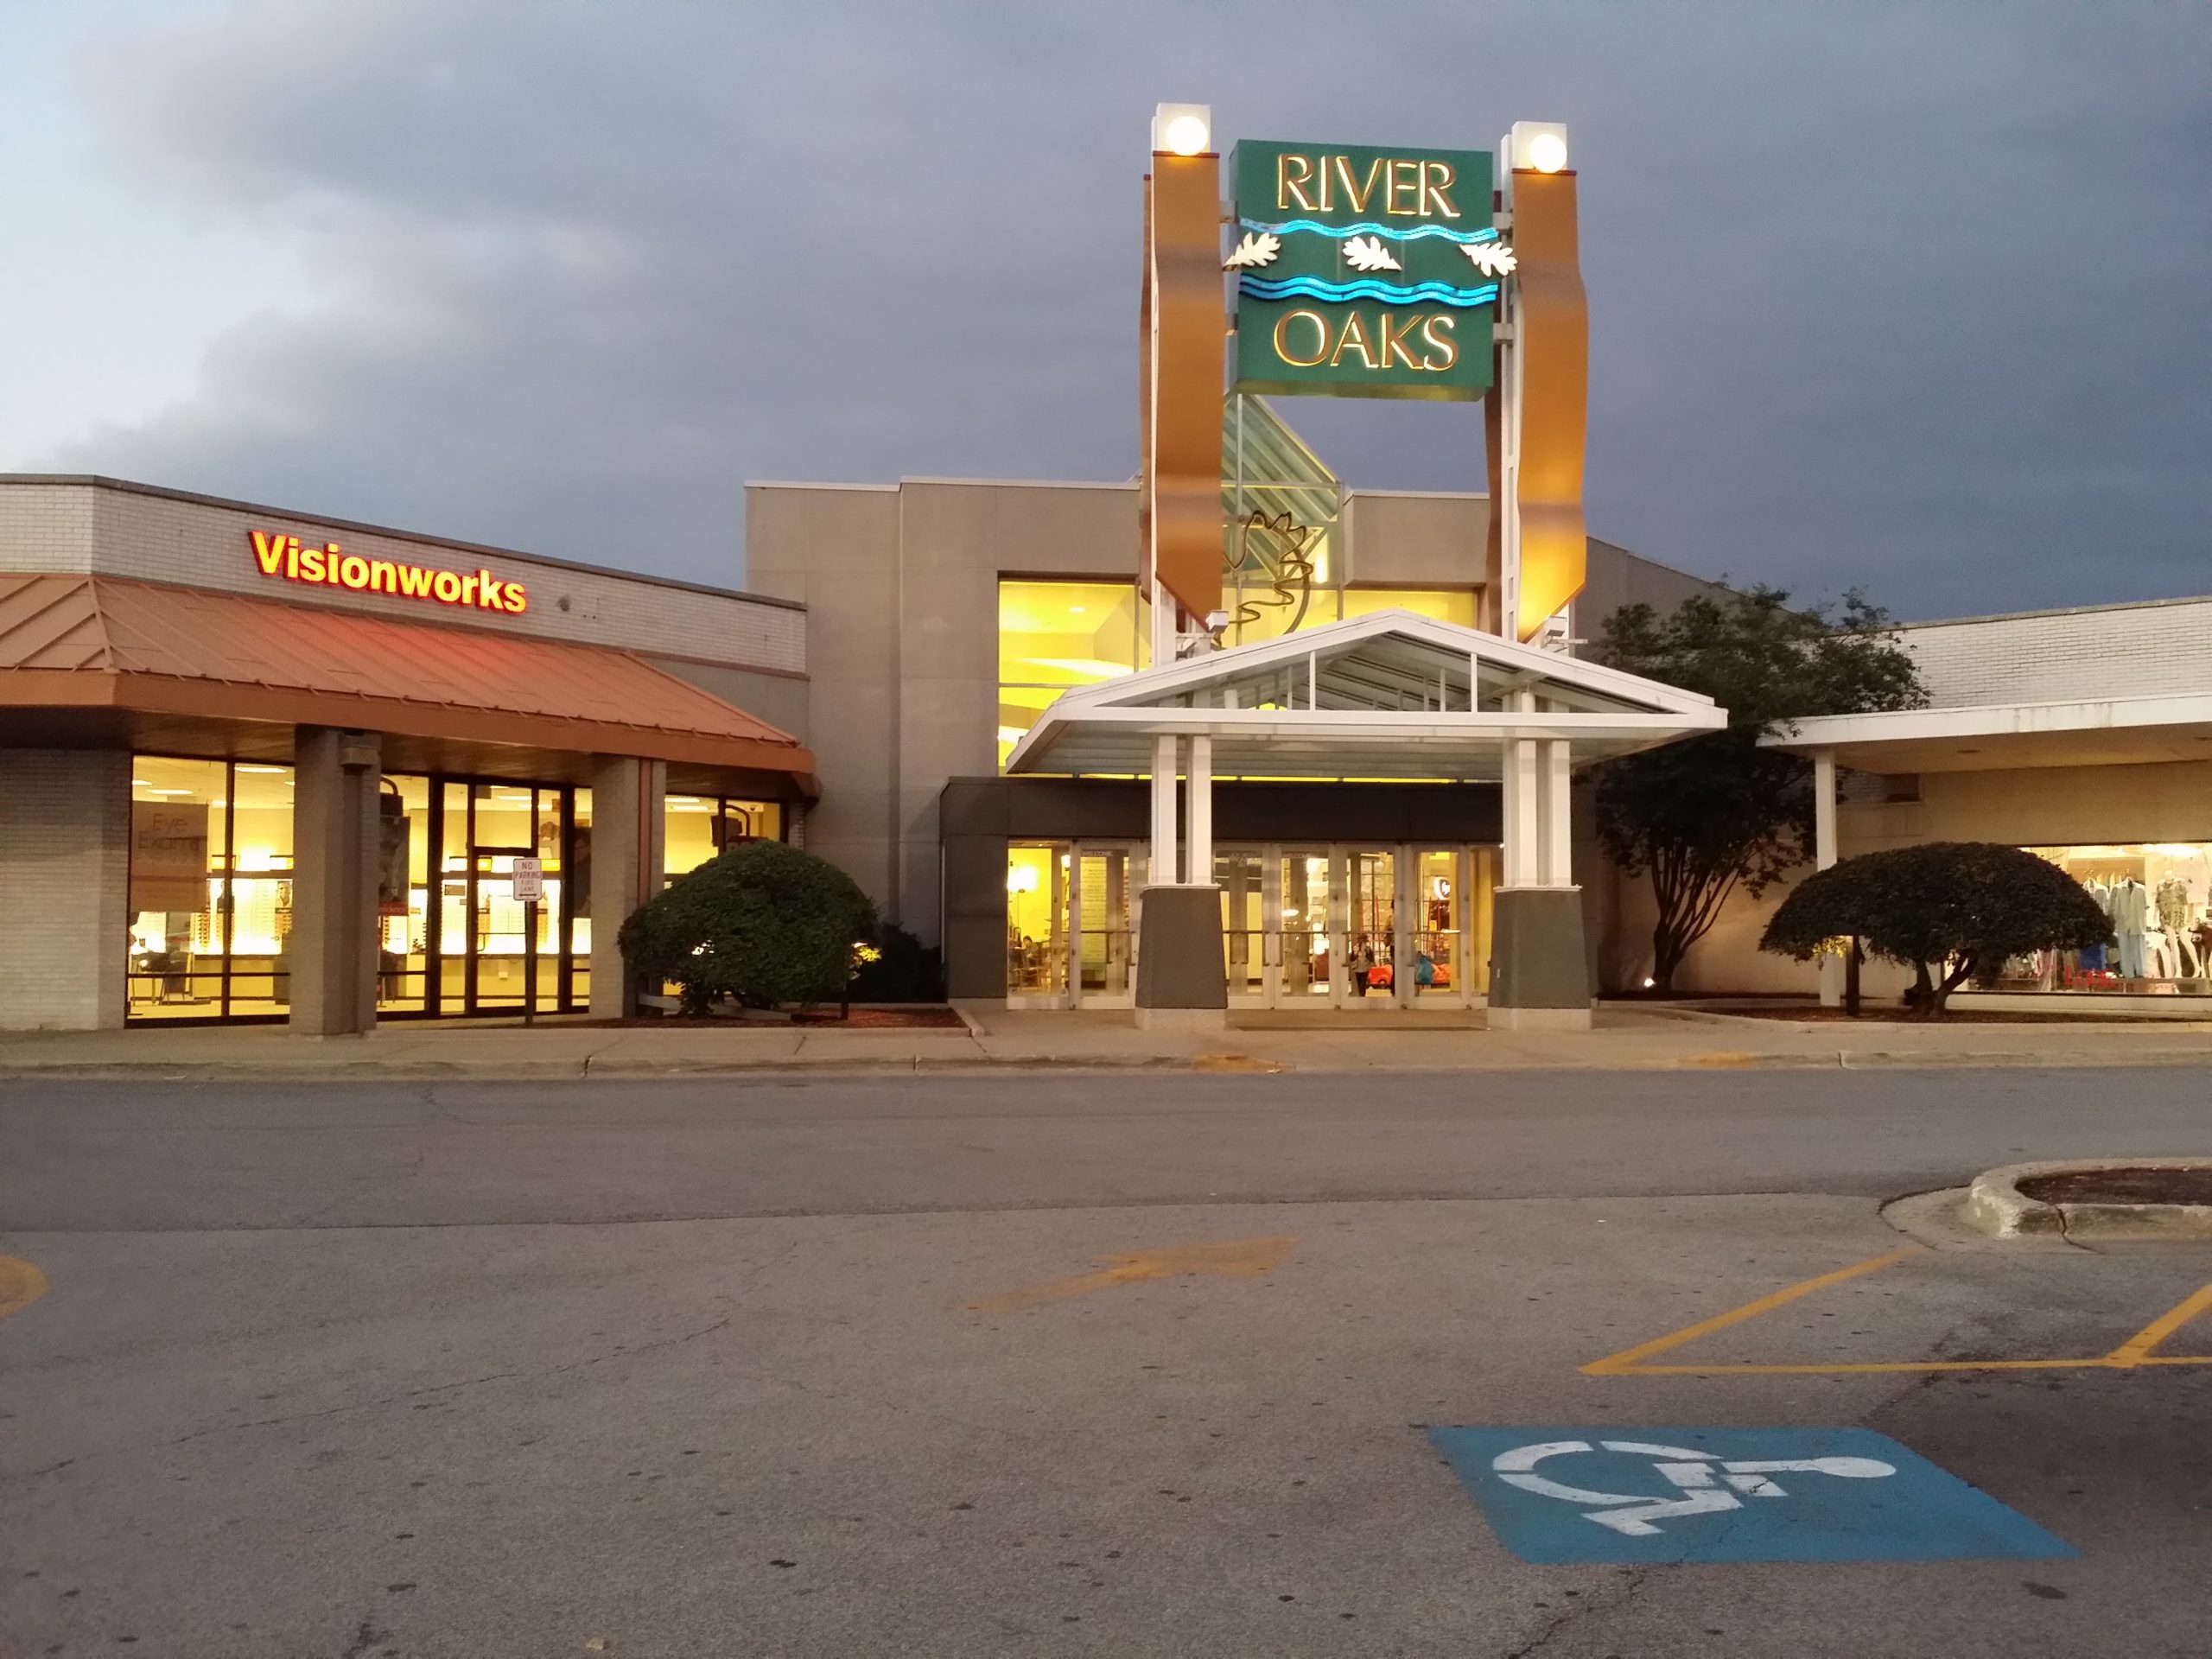 Mayor Hopes to Transform River Oaks Mall Into Entertainment District With Casino